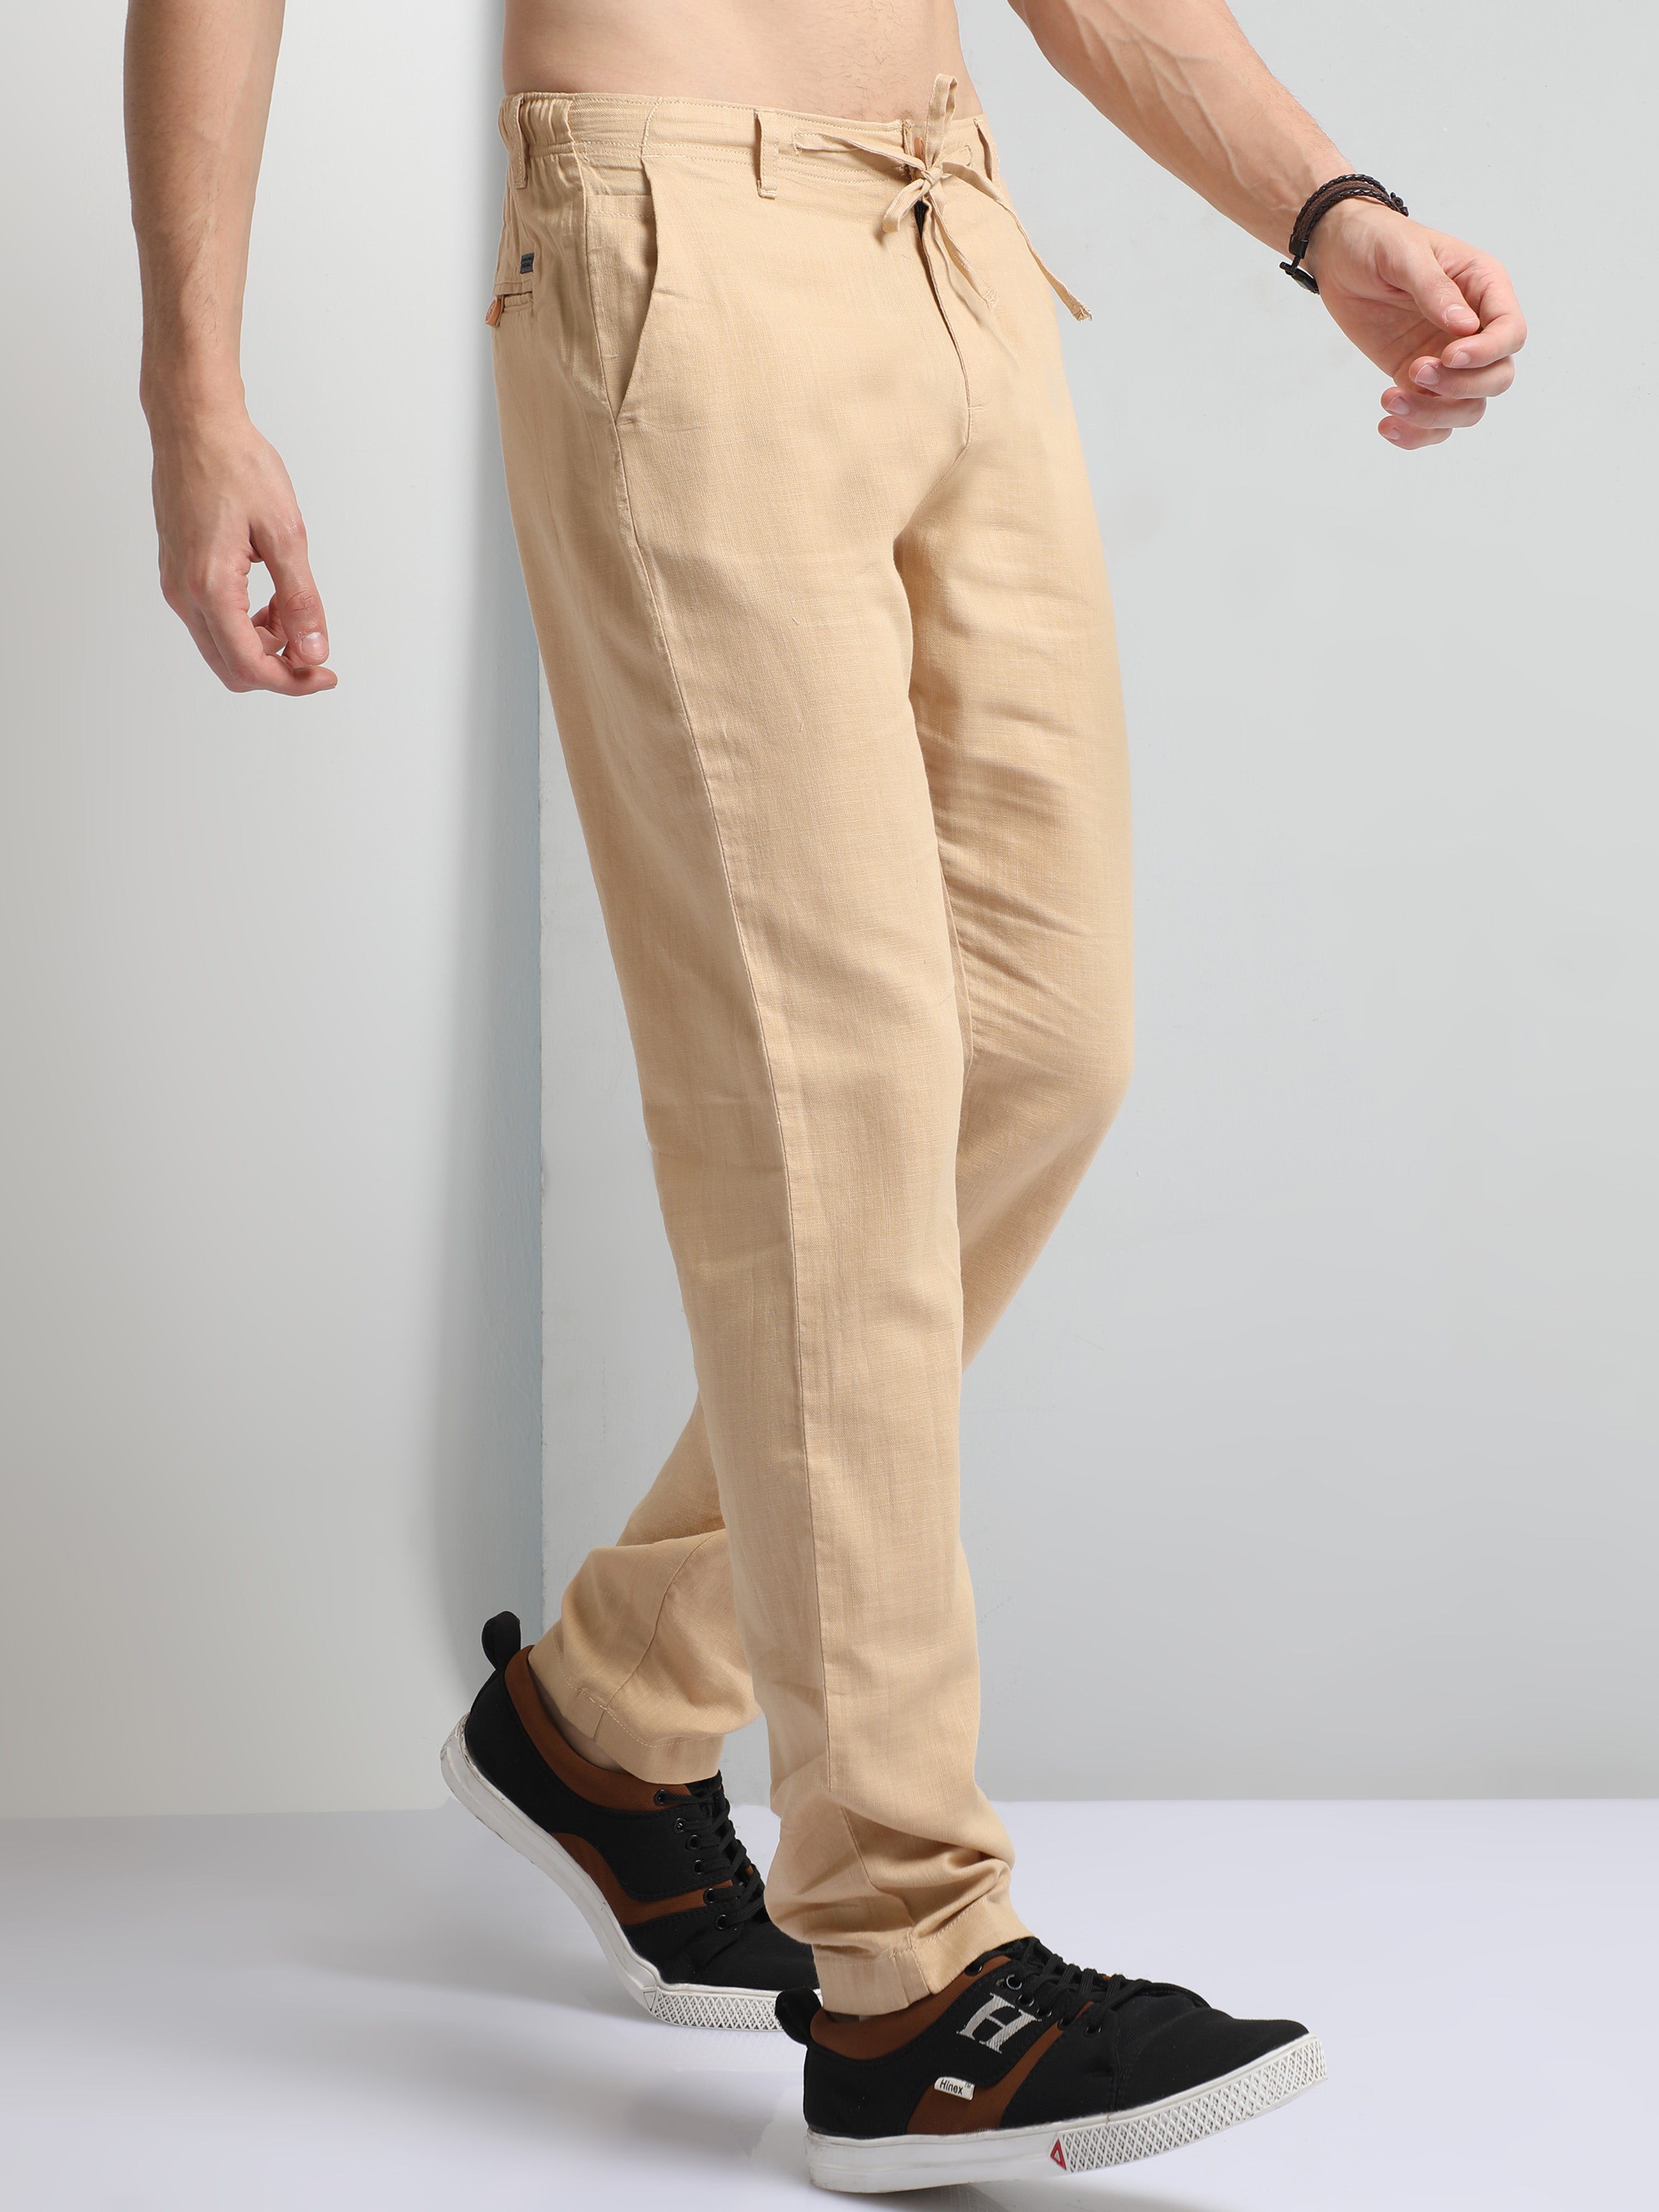 Mens Spring Cotton Linen Harem Pants With Elastic Waist Loose Fit  Traditional Chinese Linen Trousers Men For Casual Wear Style #220509 From  Dou02, $27.06 | DHgate.Com